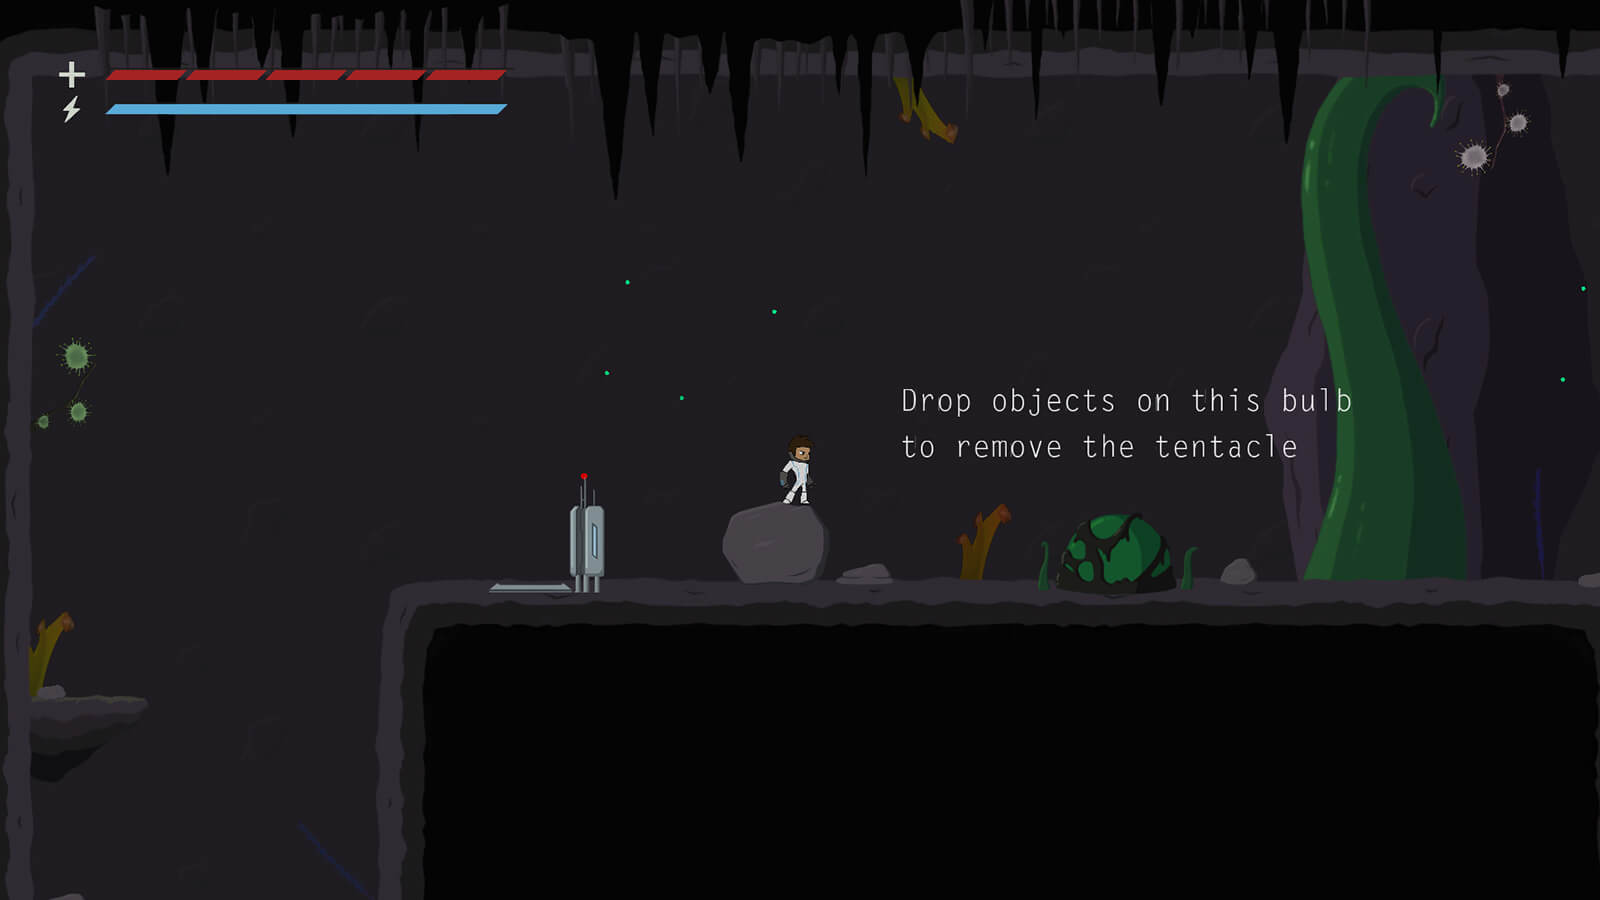 A futuristic 2D character in a white body suit stands in front of a towering green tentacle on a dark, alien world.